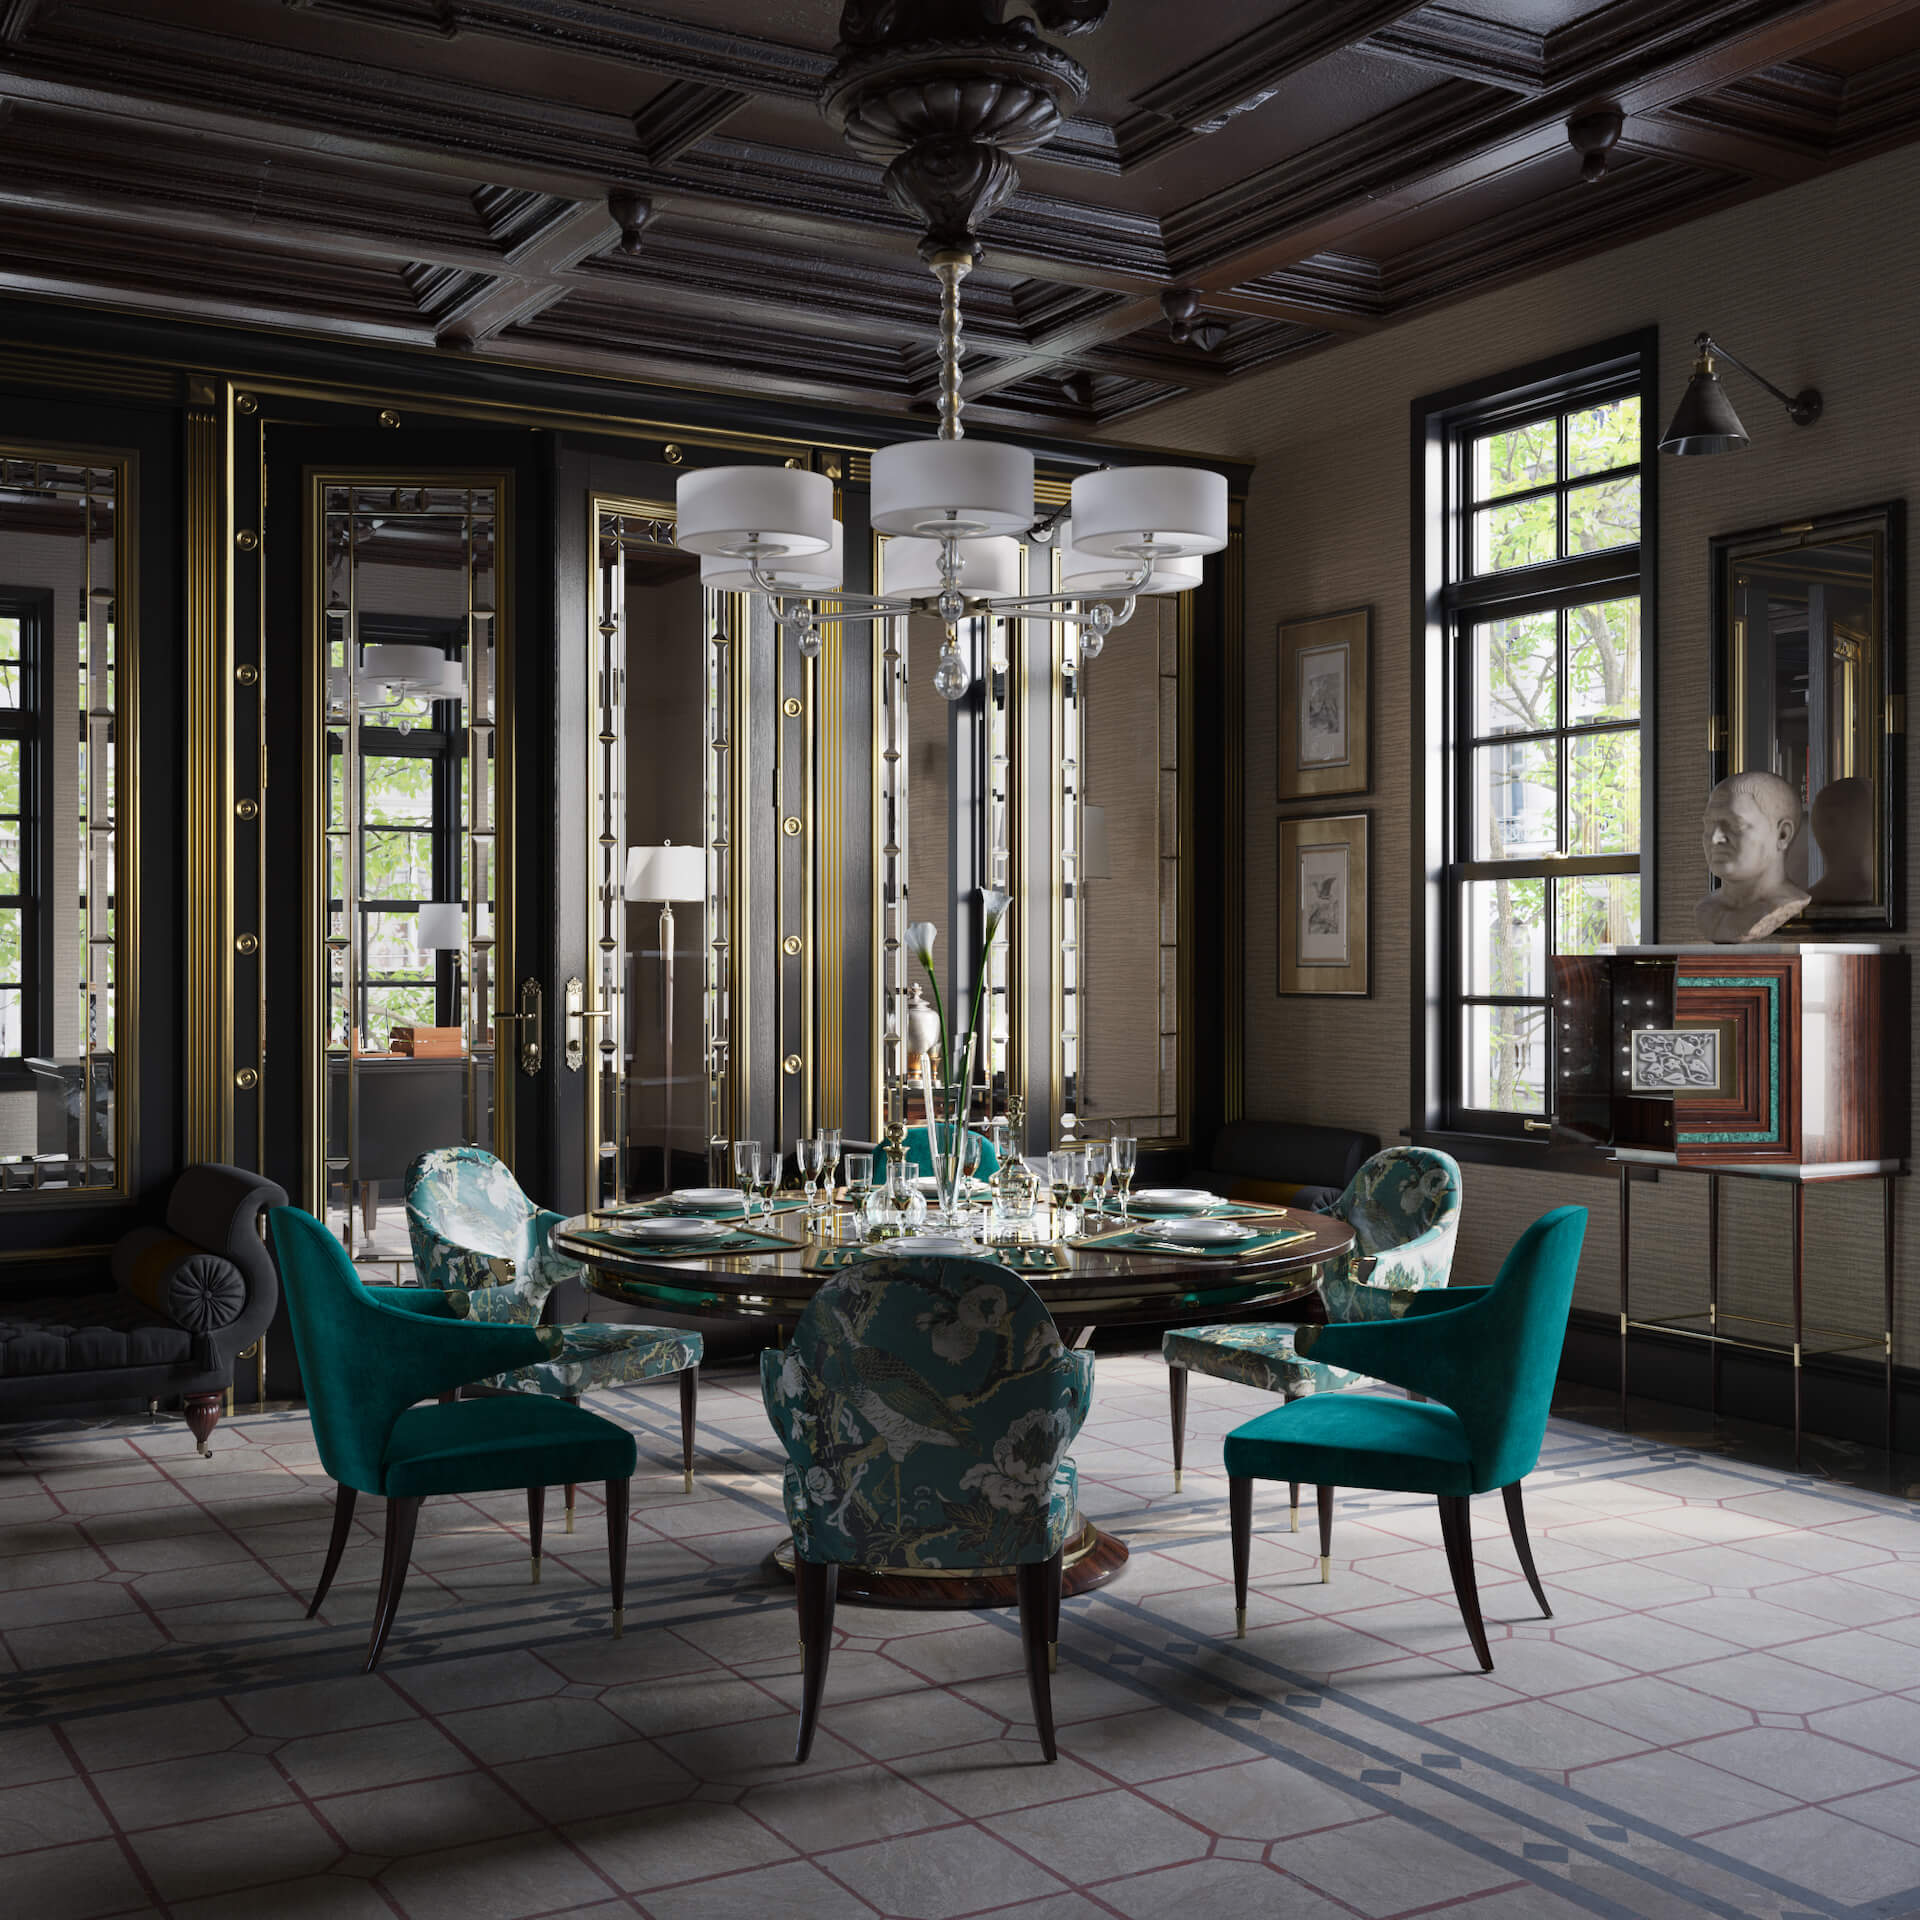 3D Rendering of a Gorgeous Dining Room Interior Design